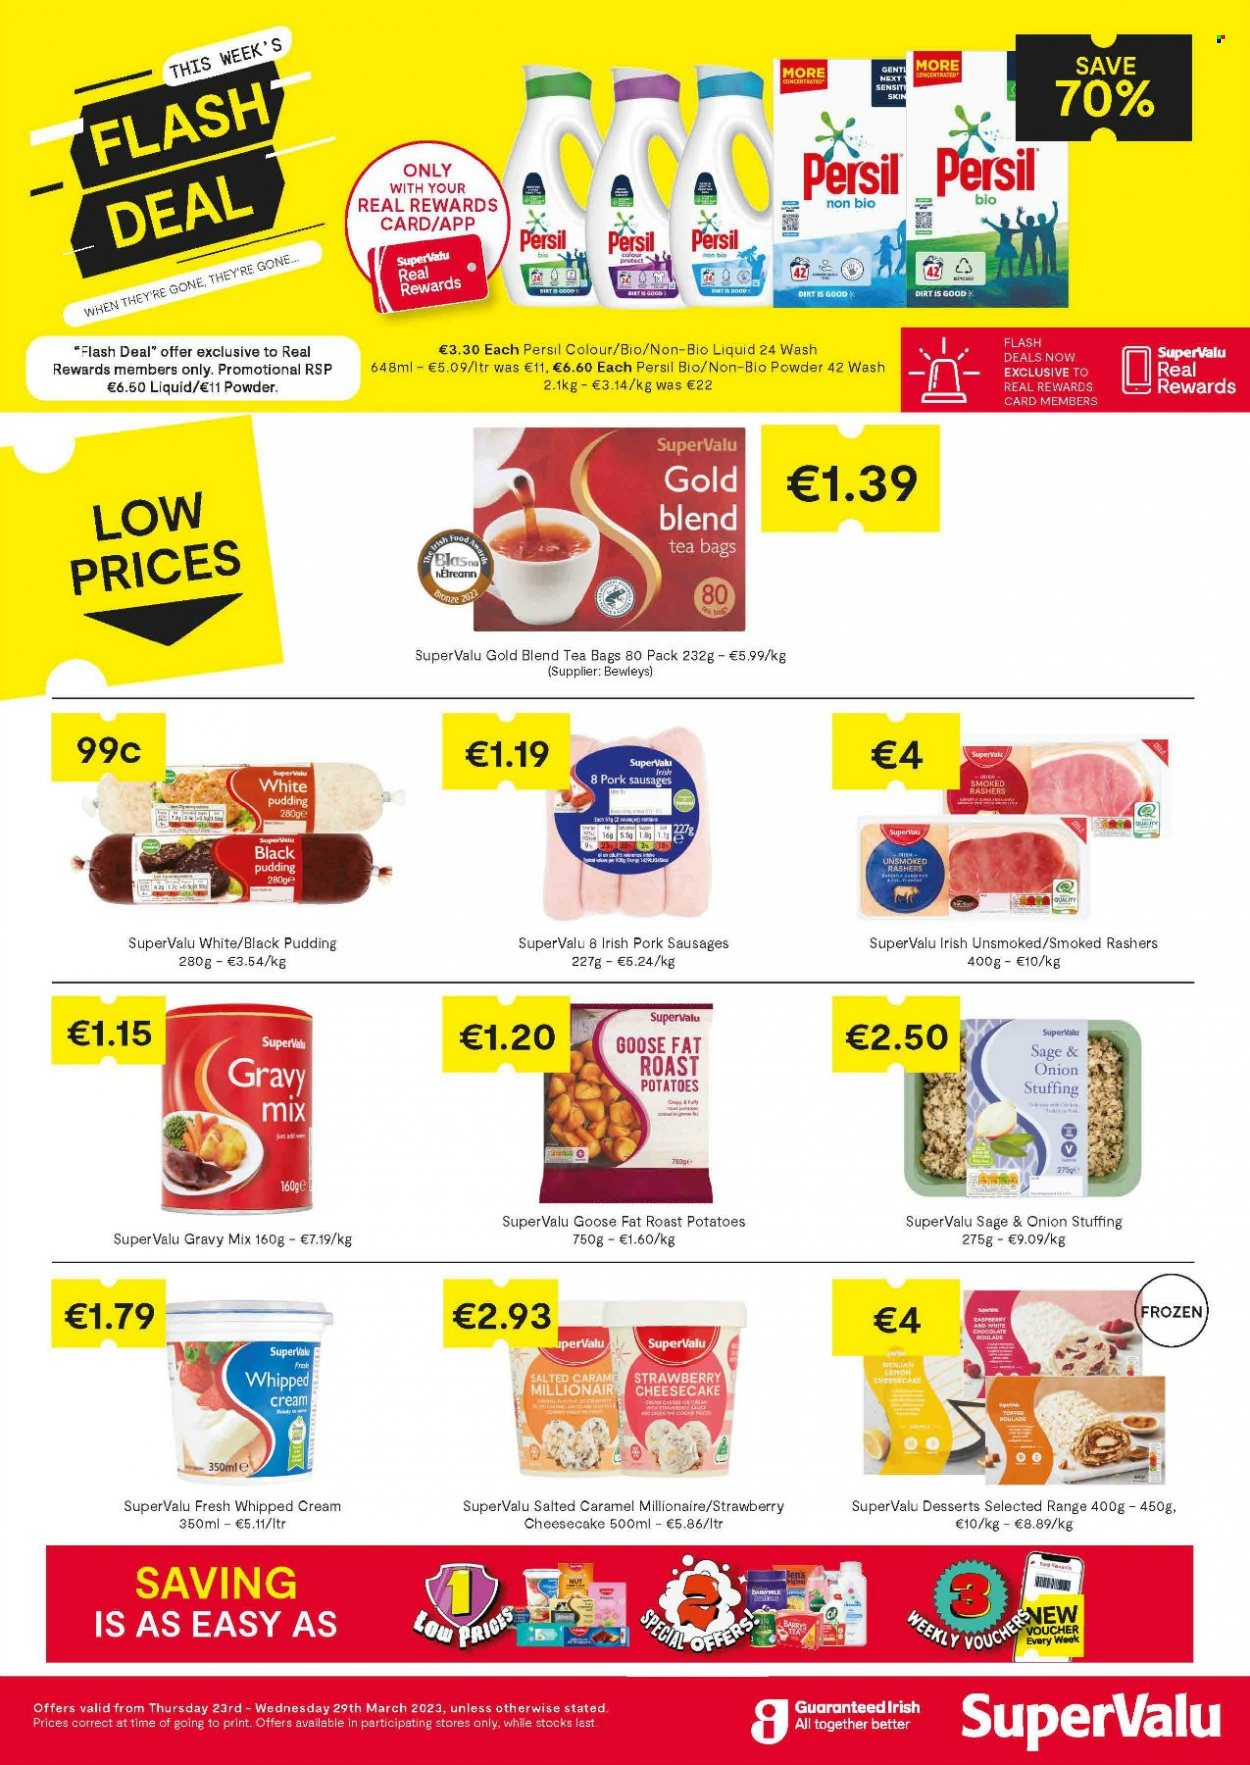 thumbnail - SuperValu offer  - 23.03.2023 - 29.03.2023 - Sales products - cheesecake, potatoes, roast, black pudding, sausage, goose fat, whipped cream, gravy mix, tea bags, Persil. Page 2.